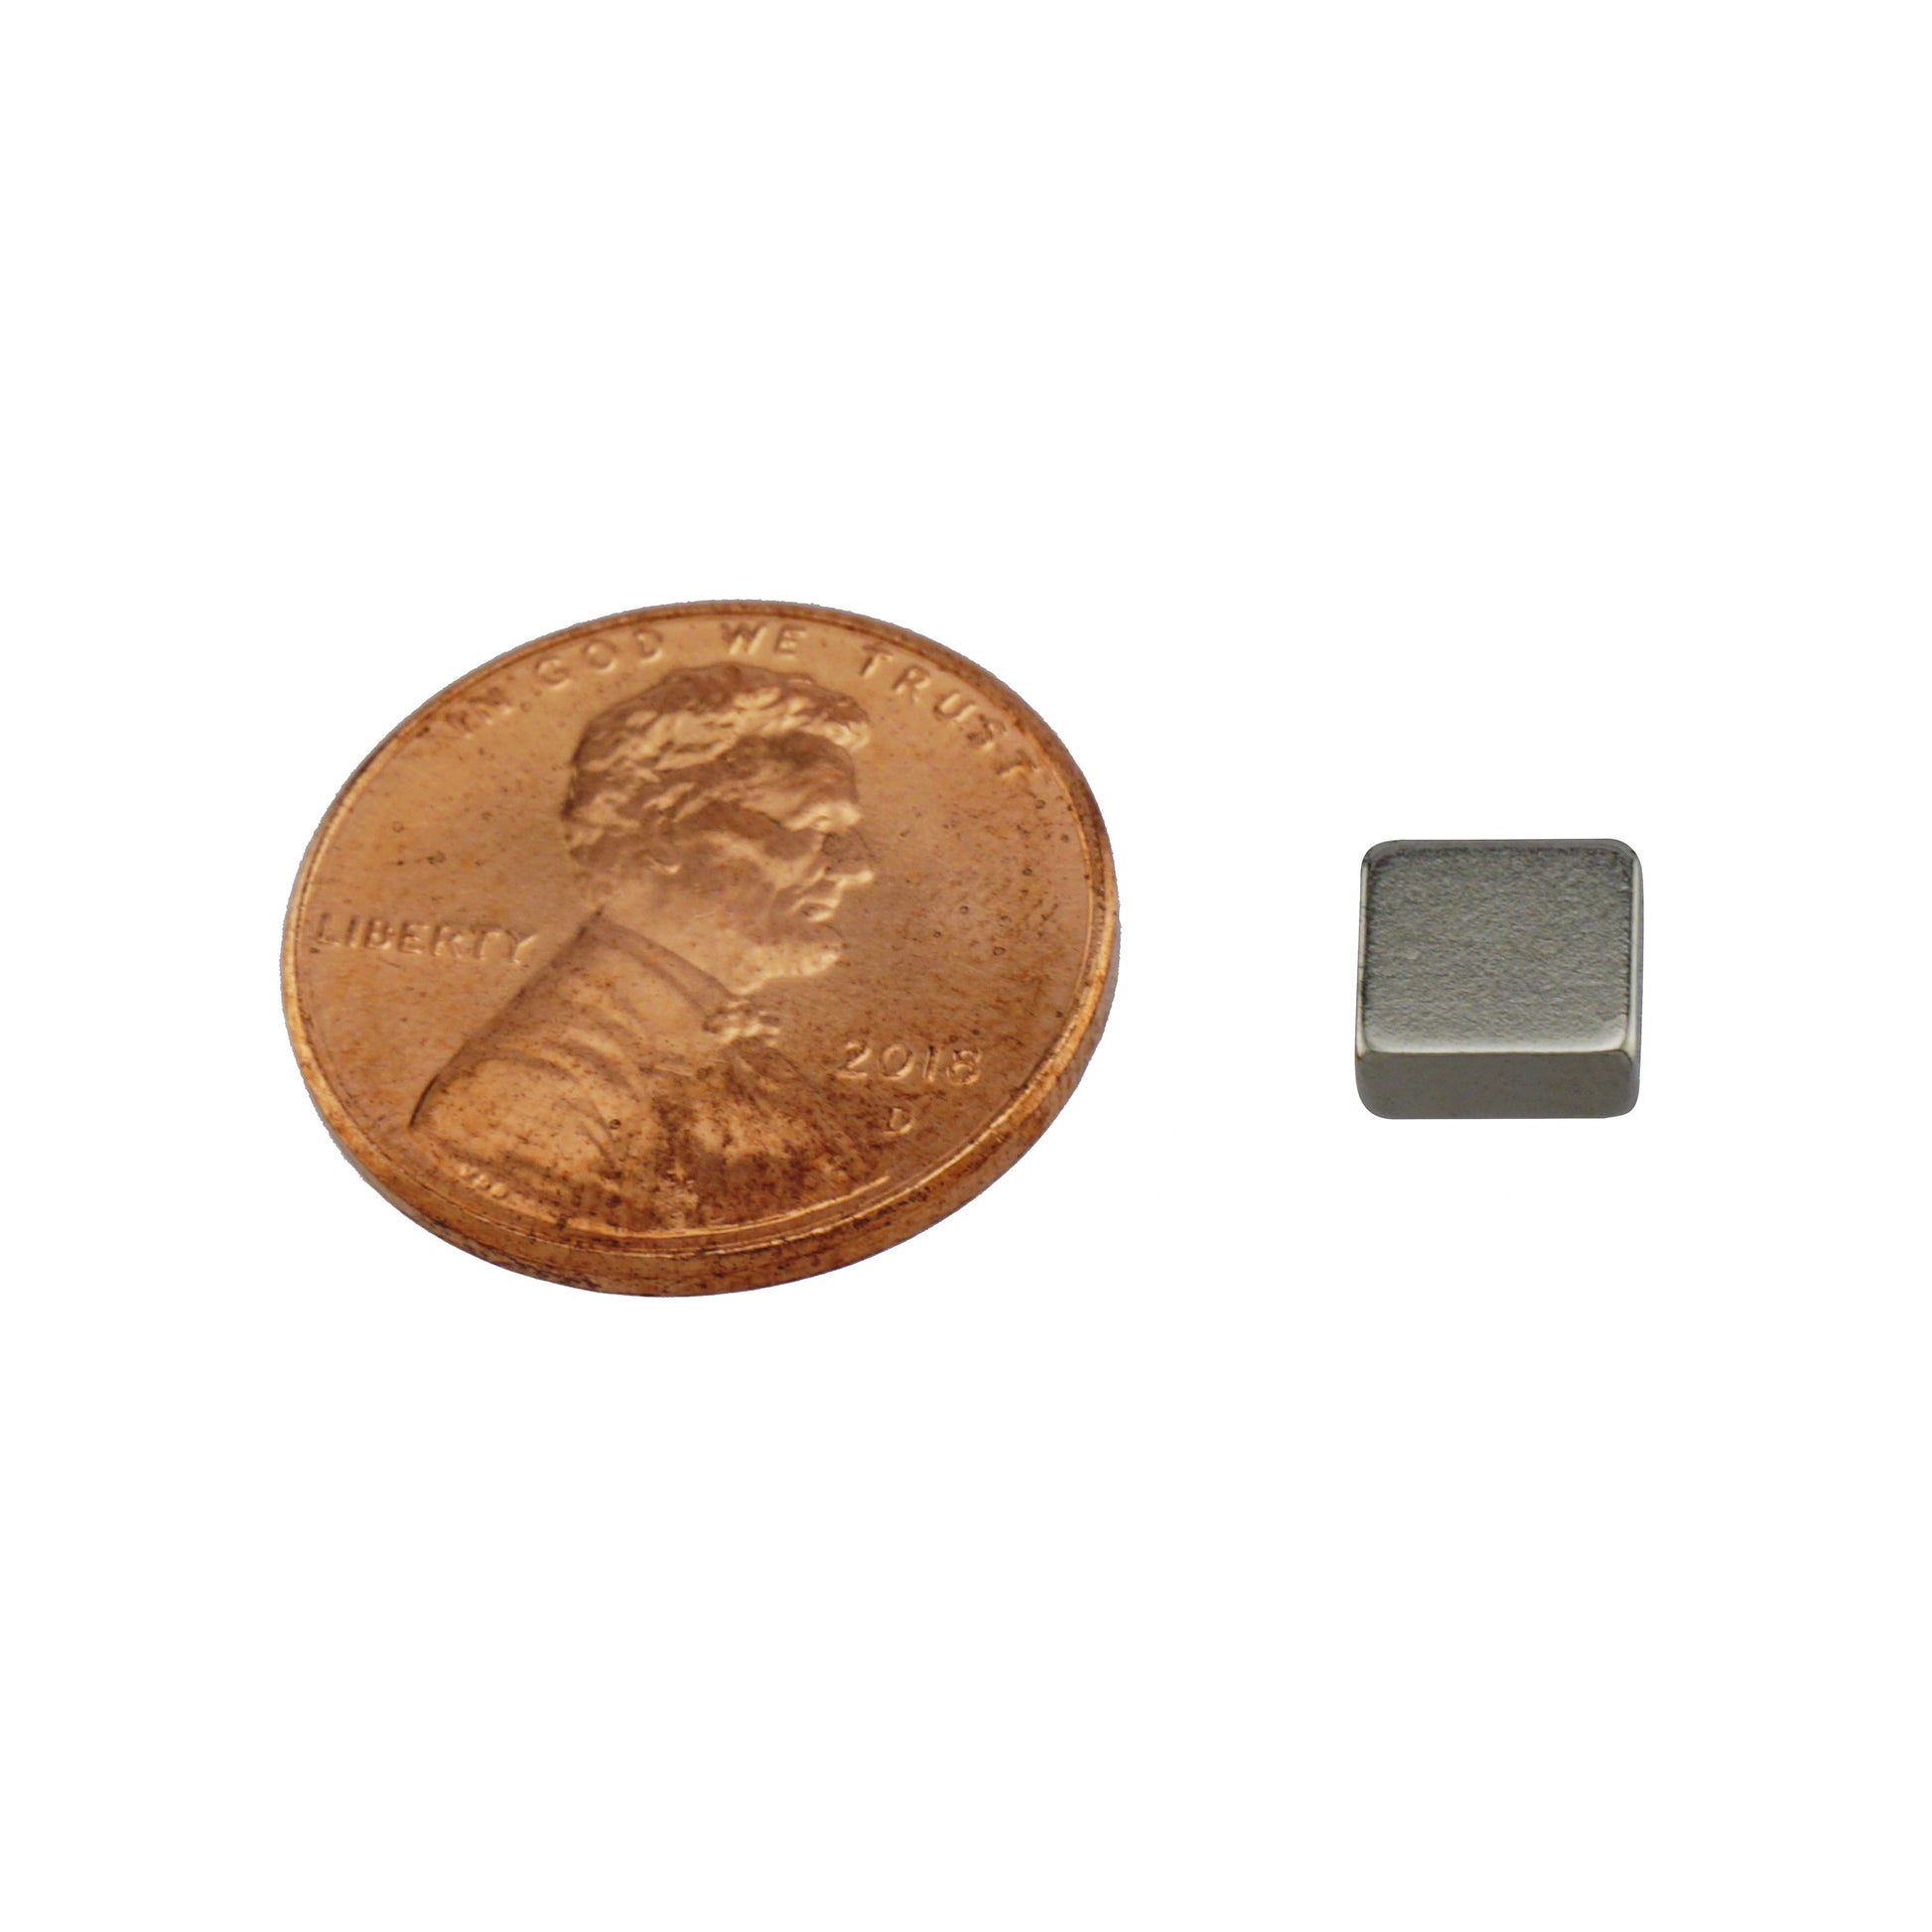 Load image into Gallery viewer, NB002542N Neodymium Block Magnet - Compared to Penny for Size Reference